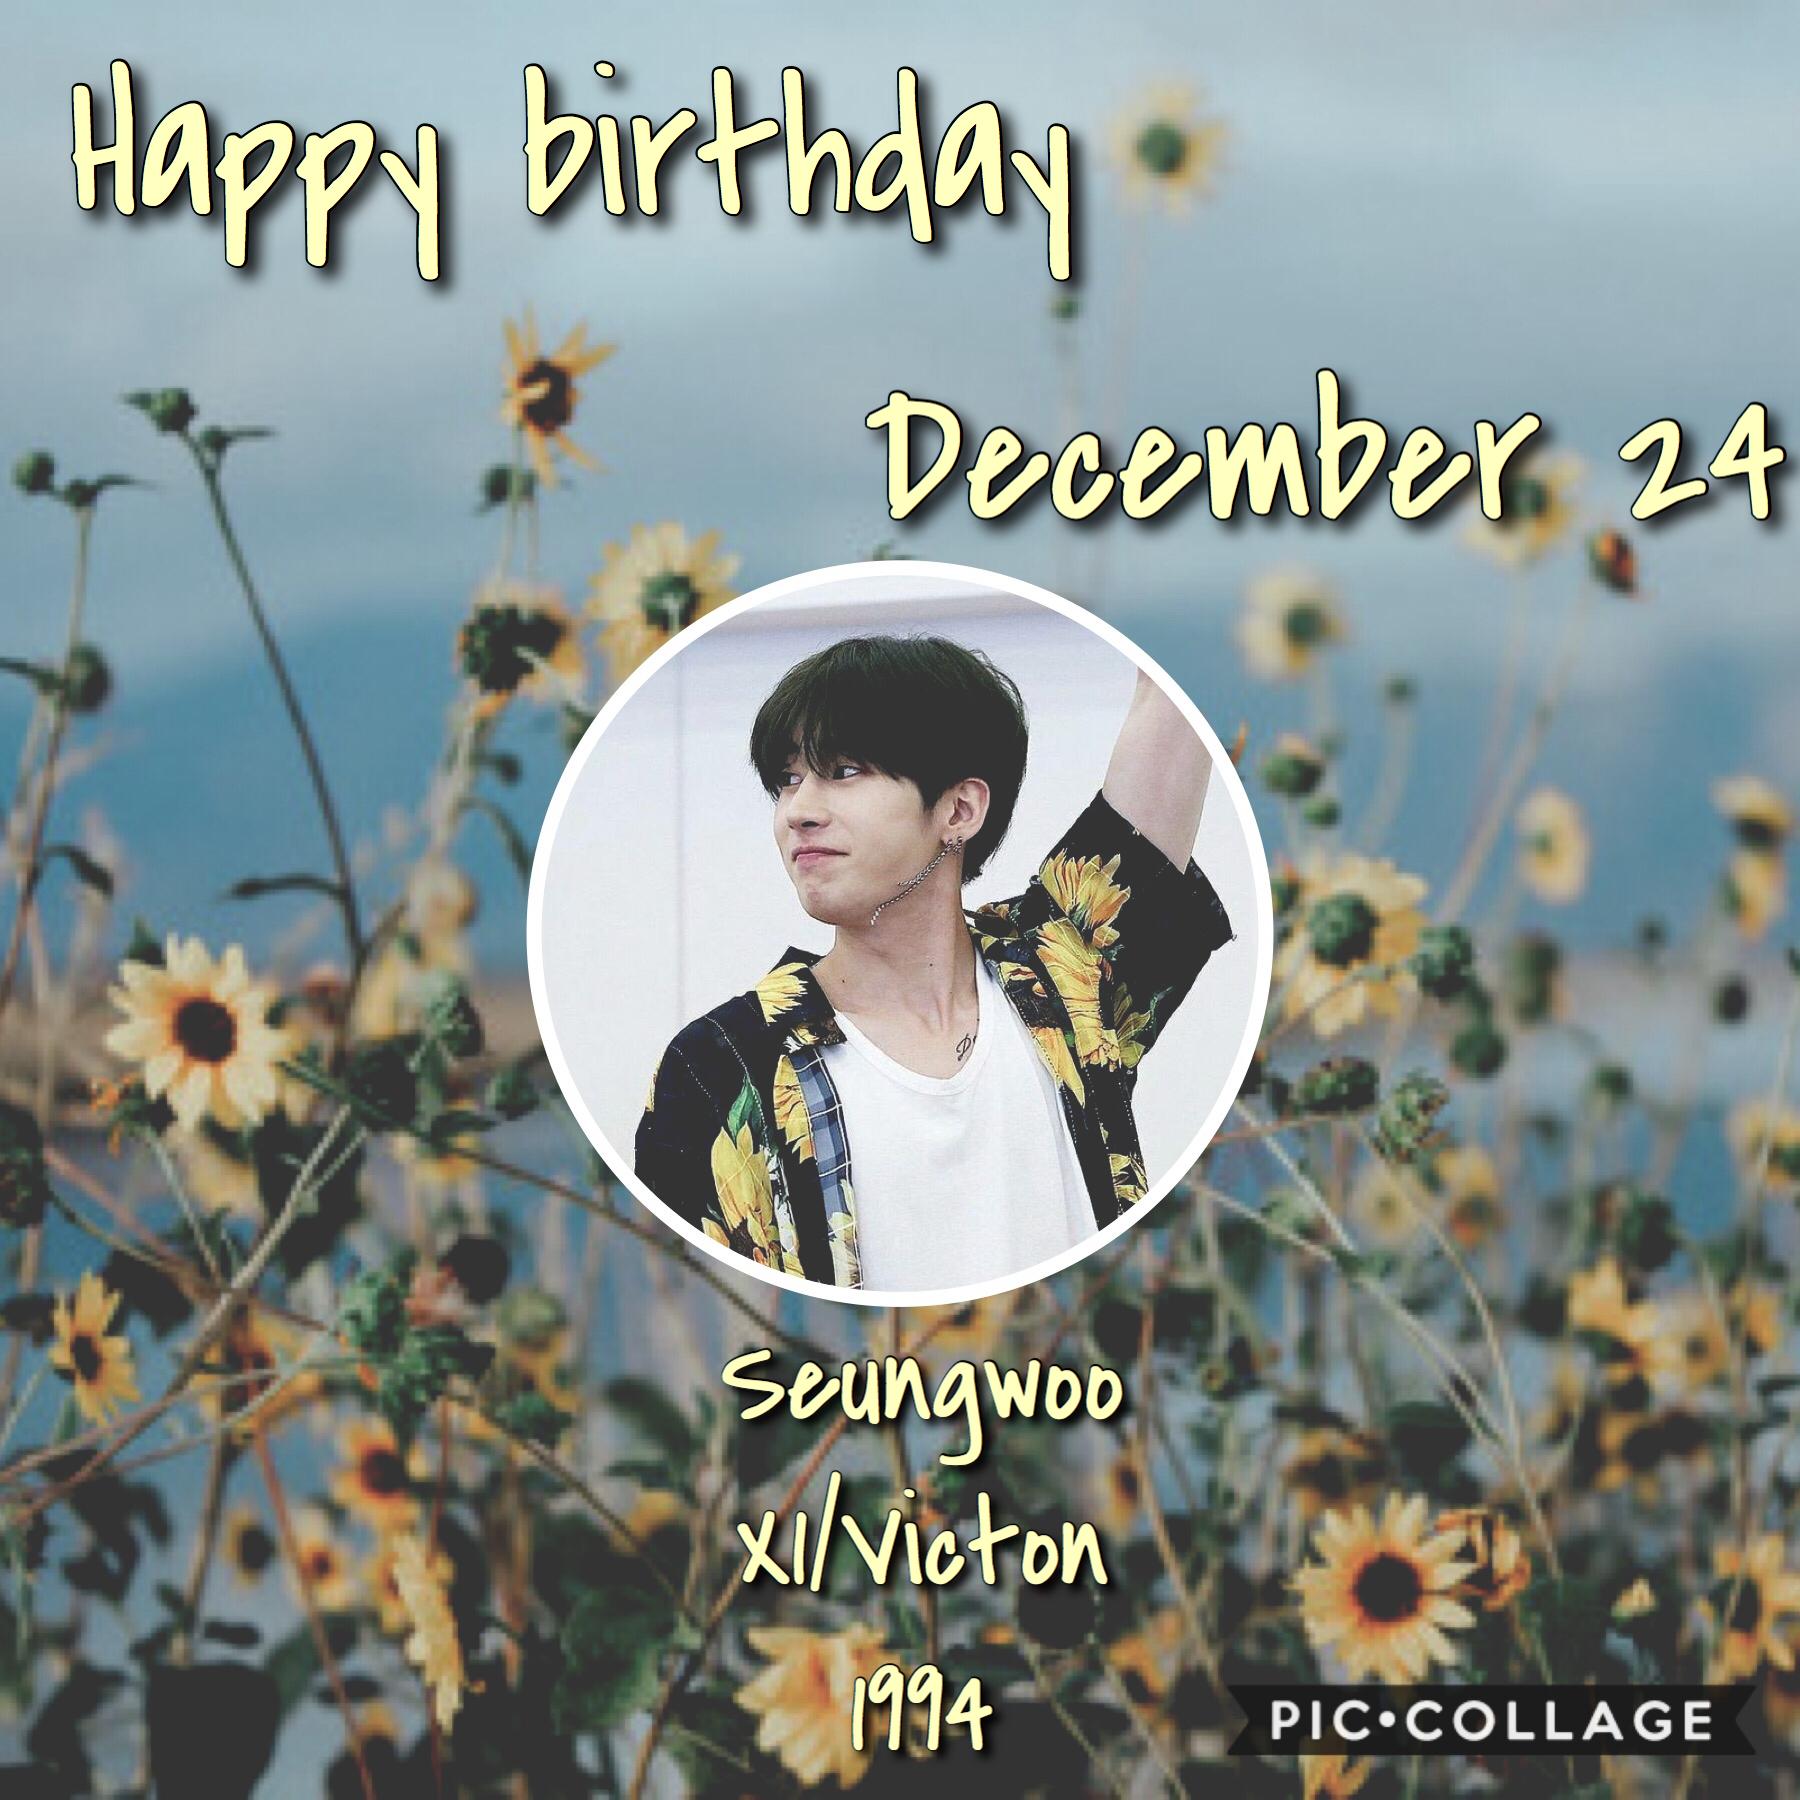 •🎈❄️•
Happy birthday Seungwoo! He’s so talented and deserves to be in his spot in X1❤️ 
⛄️❄️~Whoop~❄️⛄️